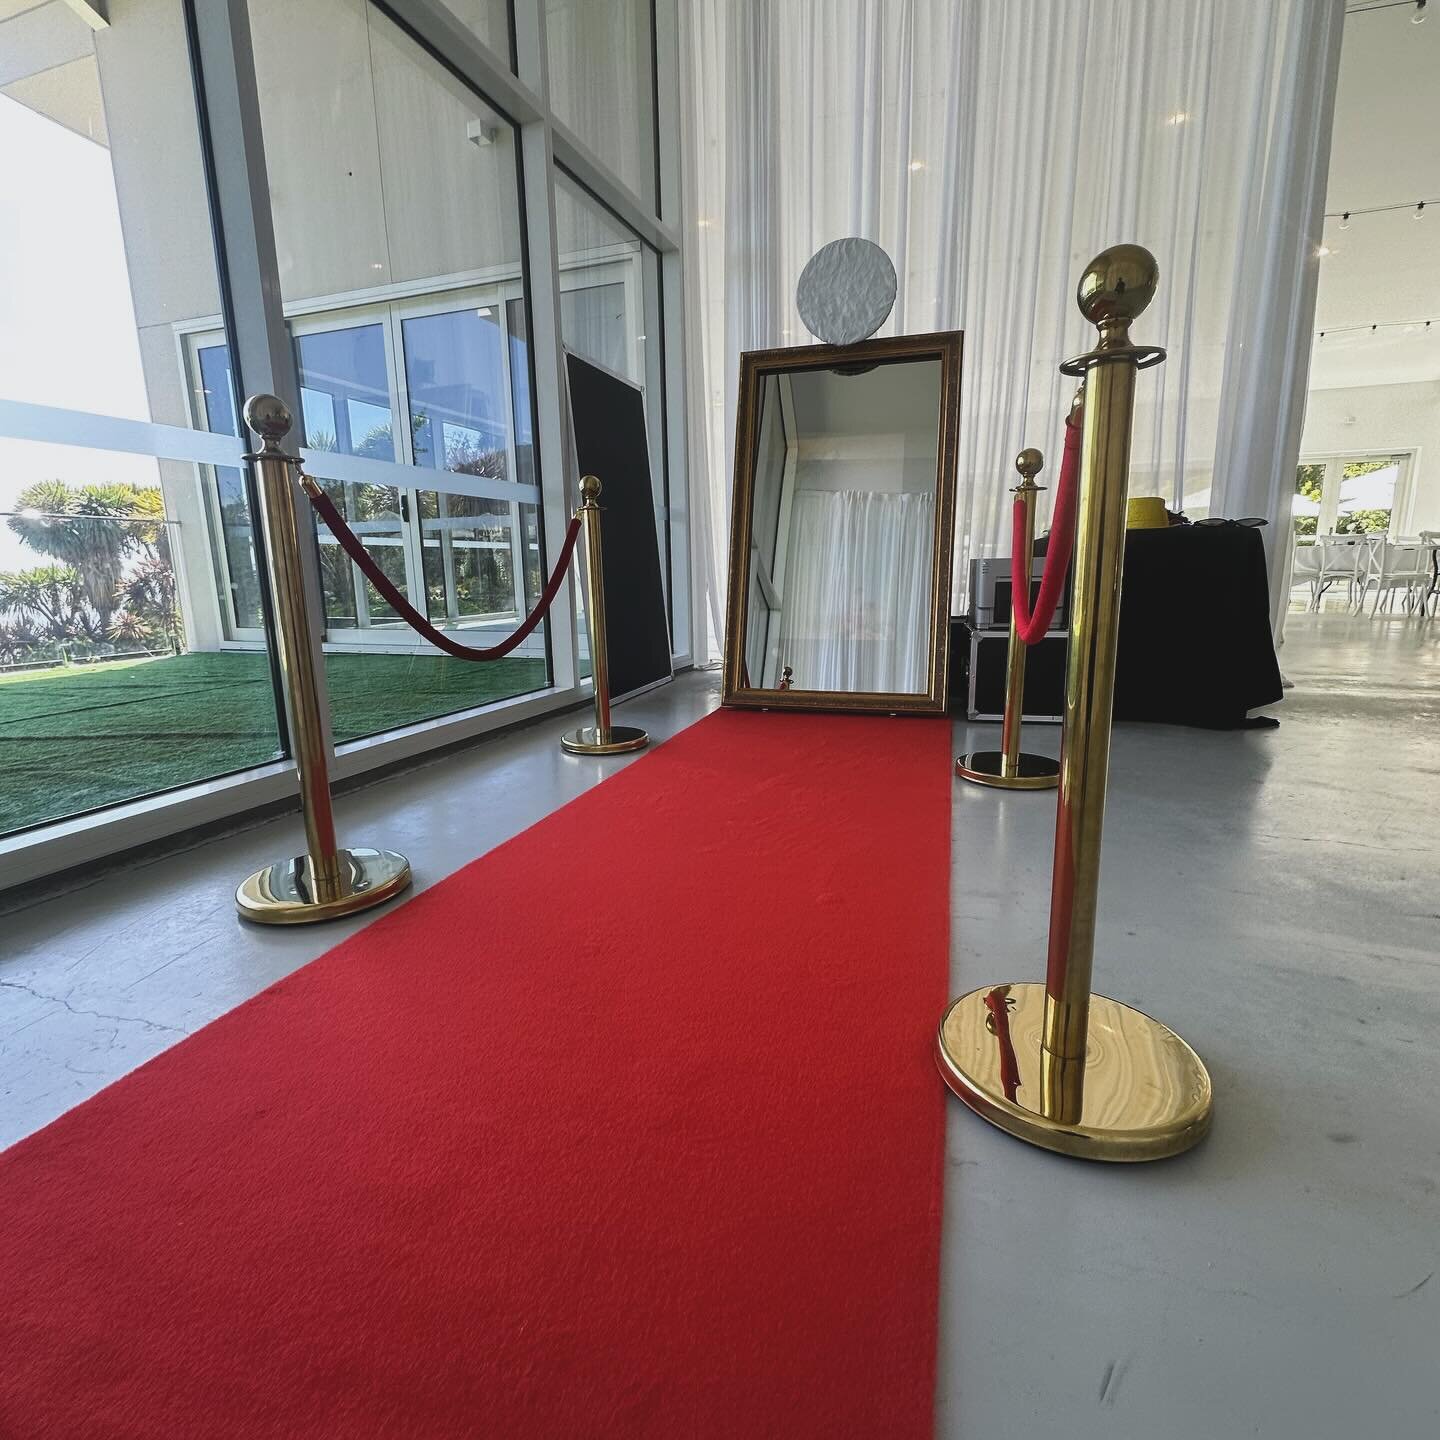 Get the red carpet treatment with our mirror Photo Booth 🪞

Only $650 for the first two hours then $150 each additional 👀

#hobart #photobooth #mirrorphotobooth #hobartphotobooth #taswedding #hobartwedding #tasmanianwedding